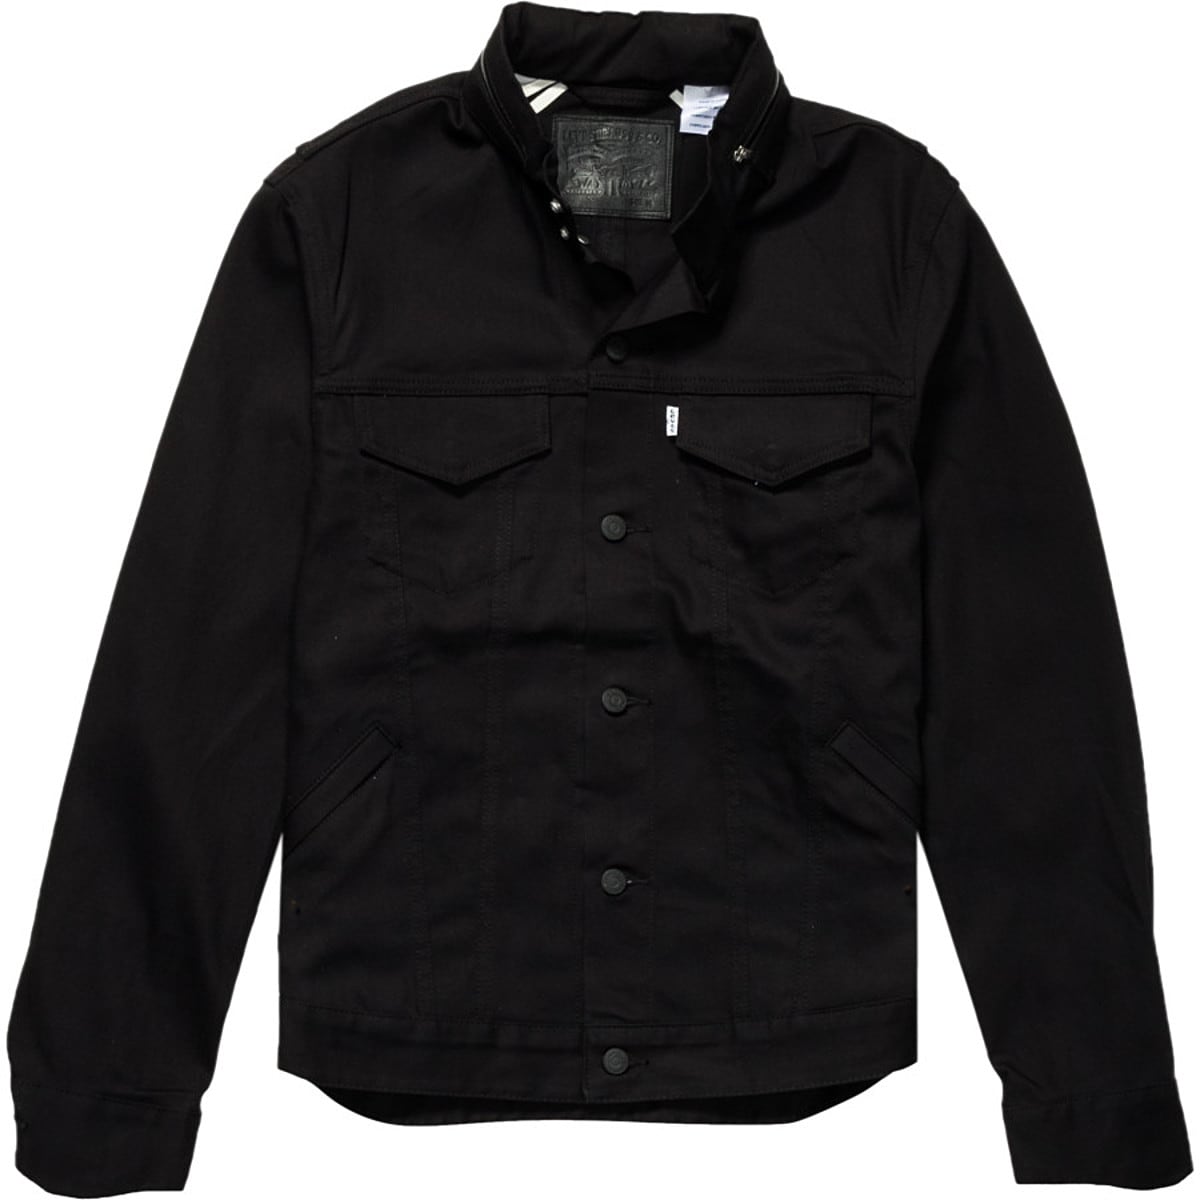 Levi's Commuter Series Hooded Trucker  Jacket - Clothing